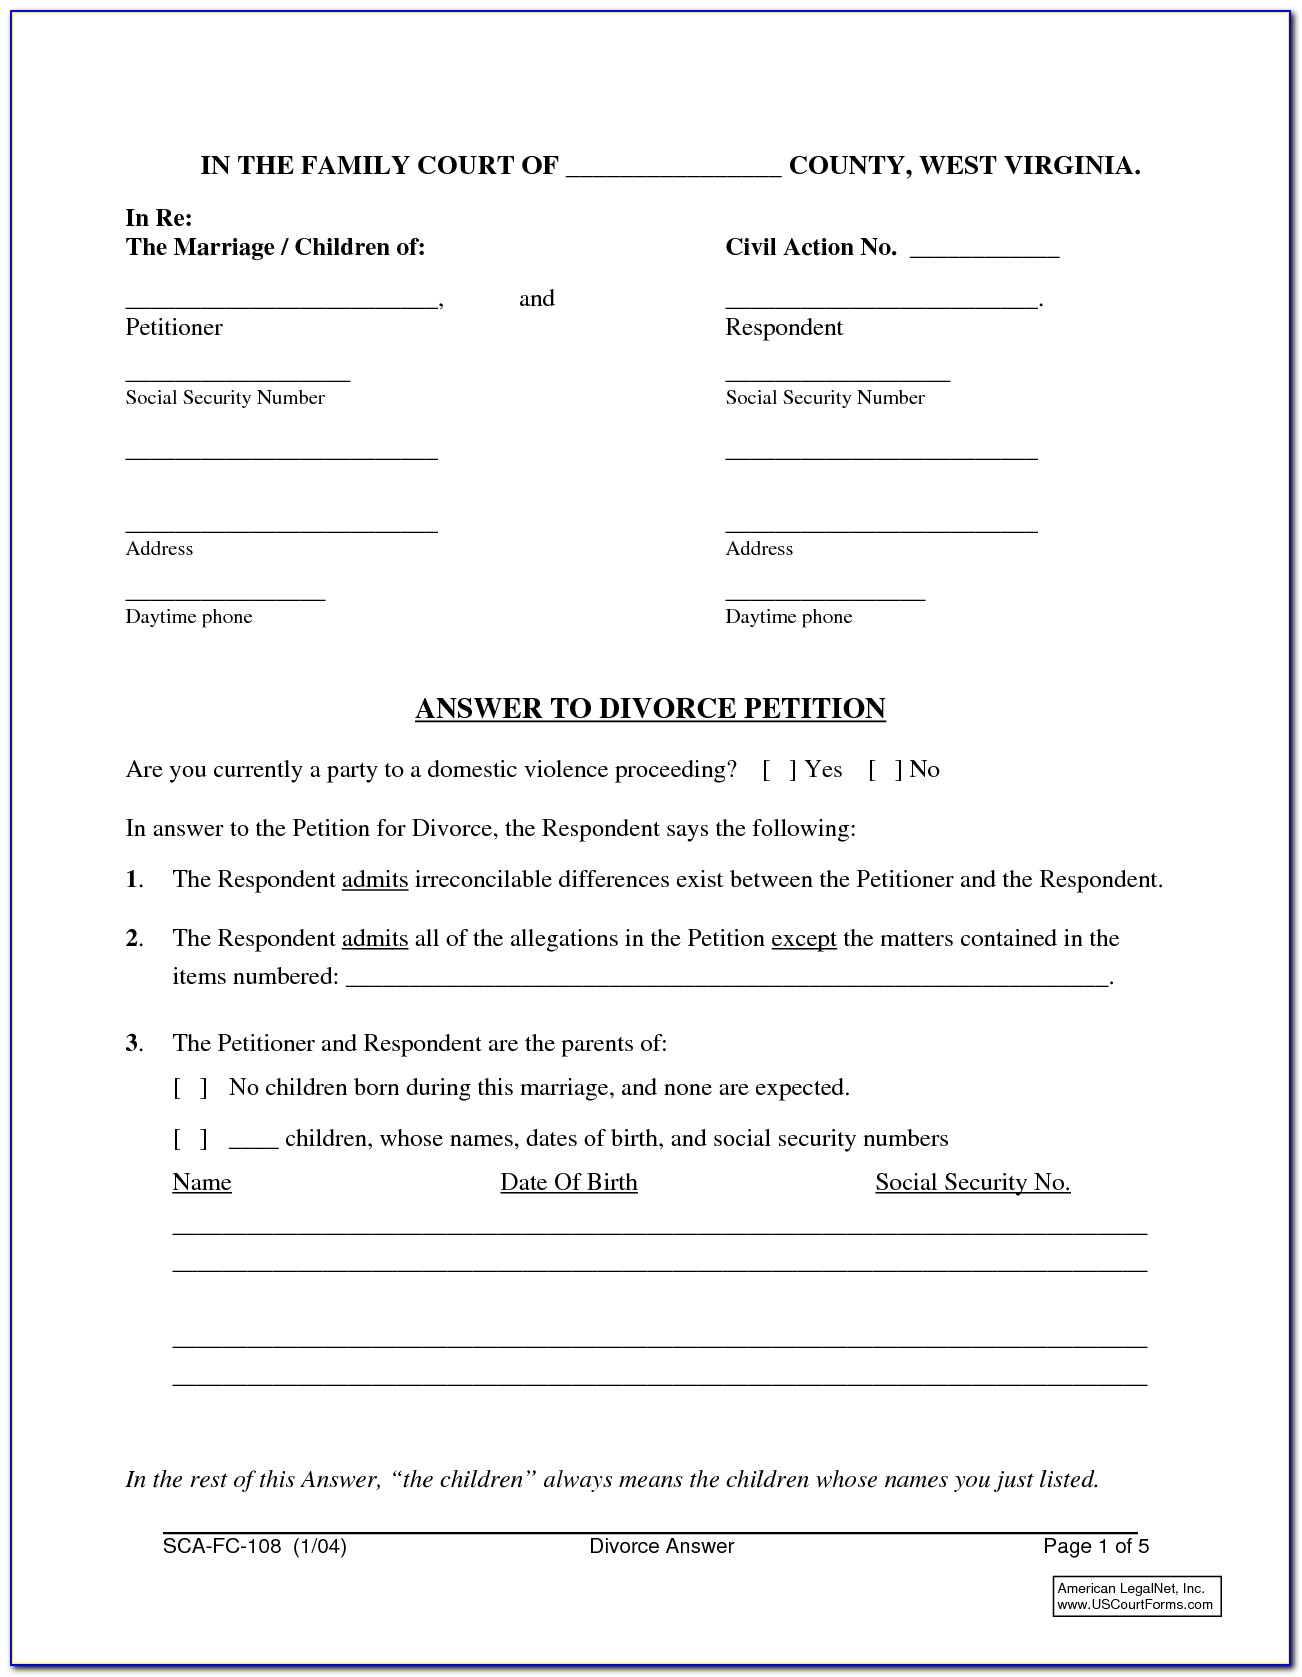 texas-divorce-forms-fill-online-printable-fillable-blank-pdffiller